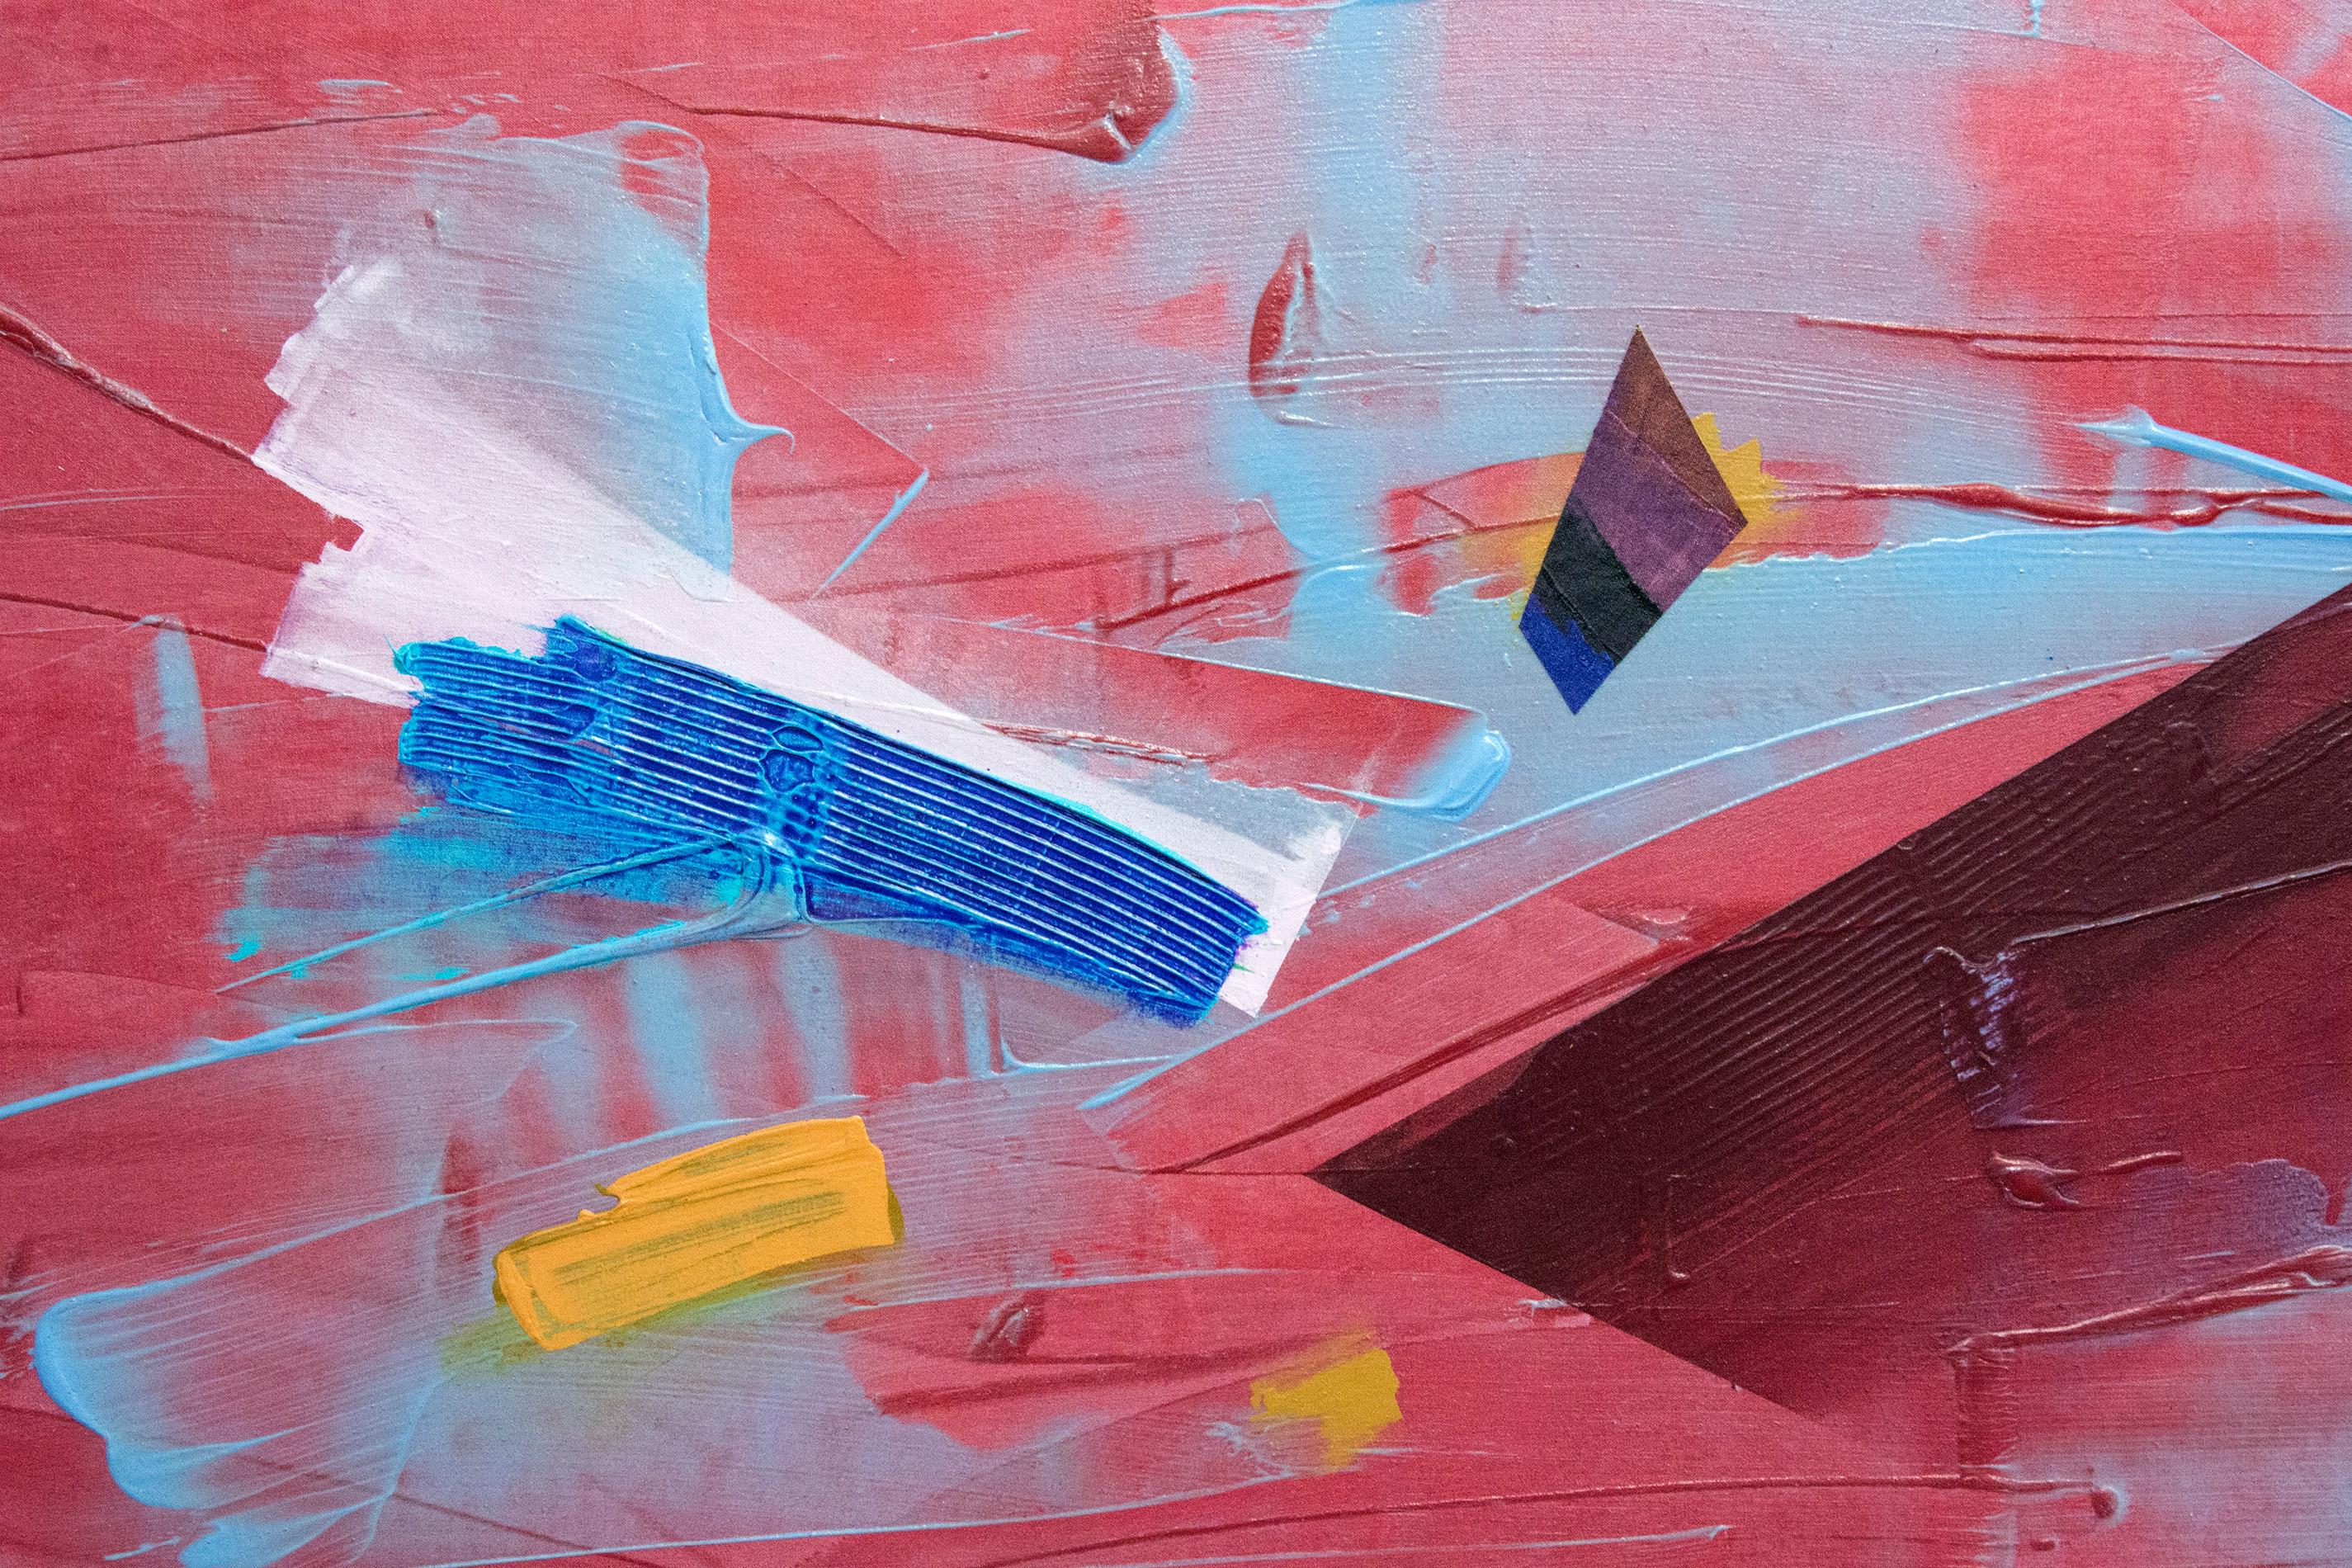 Red Finish - horizontal dynamic abstraction with red, yellow and blue - Painting by Milly Ristvedt